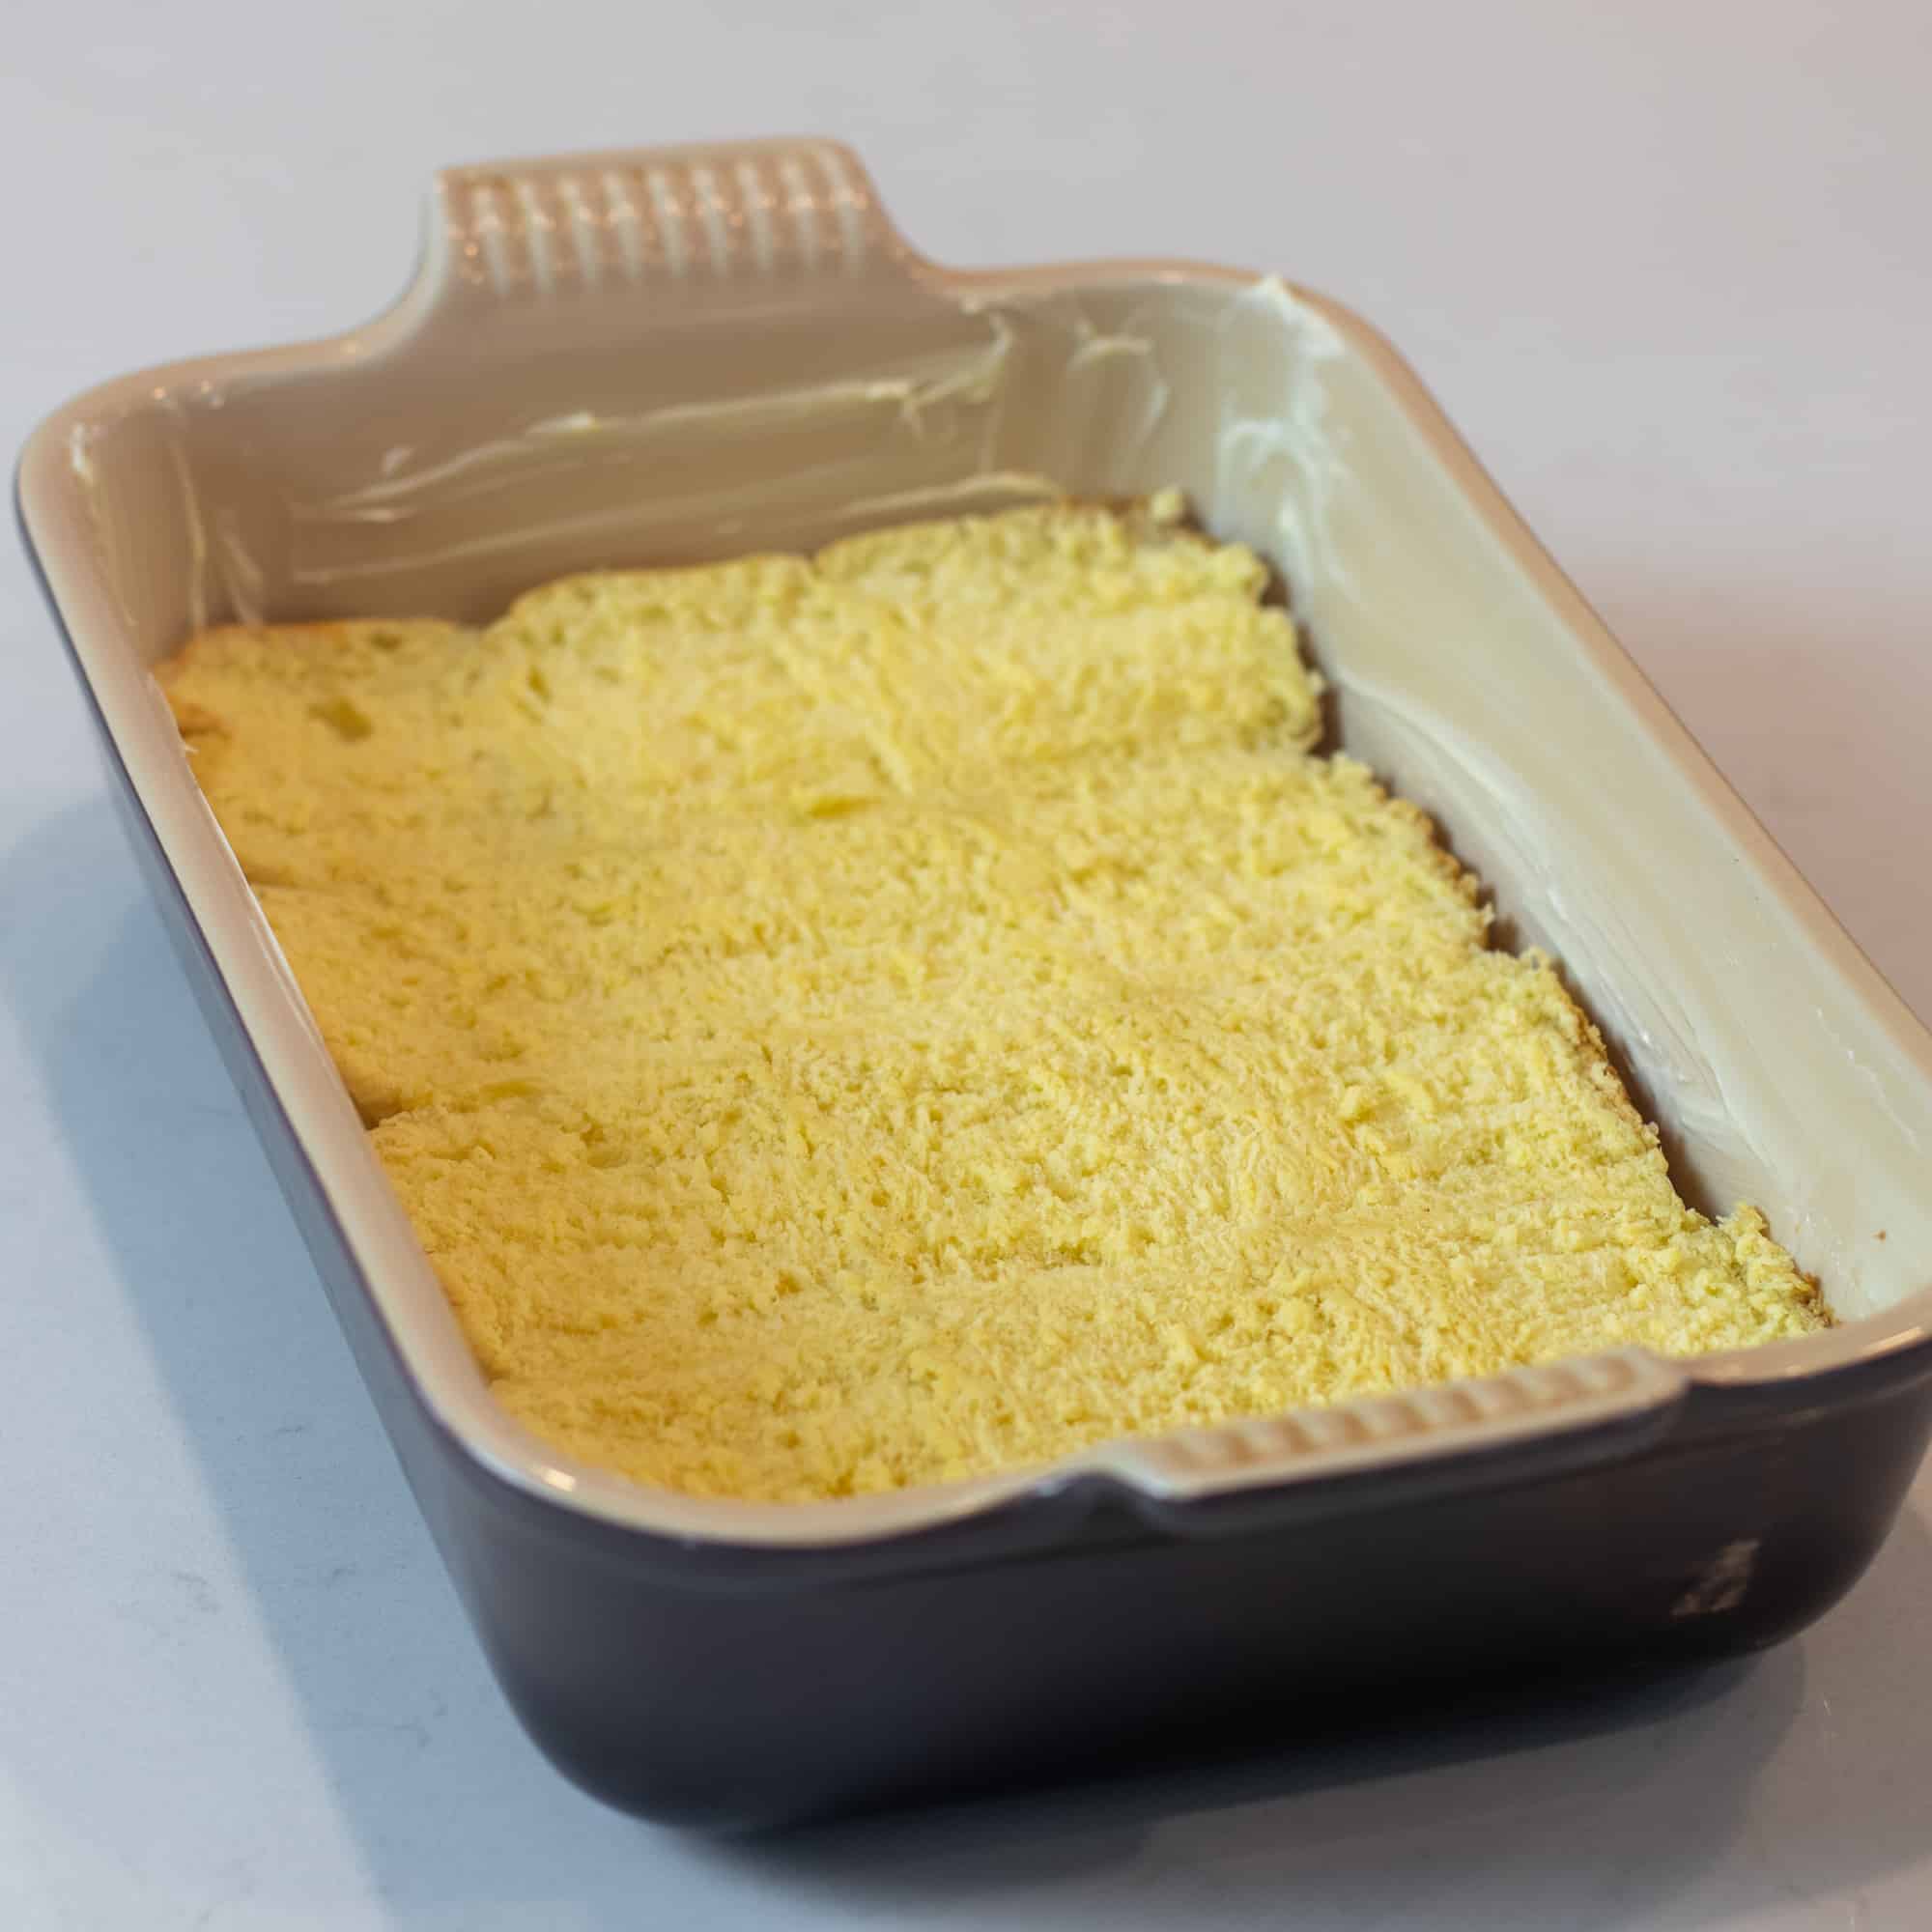 Place the bottom slices of dinner rolls in a baking dish.